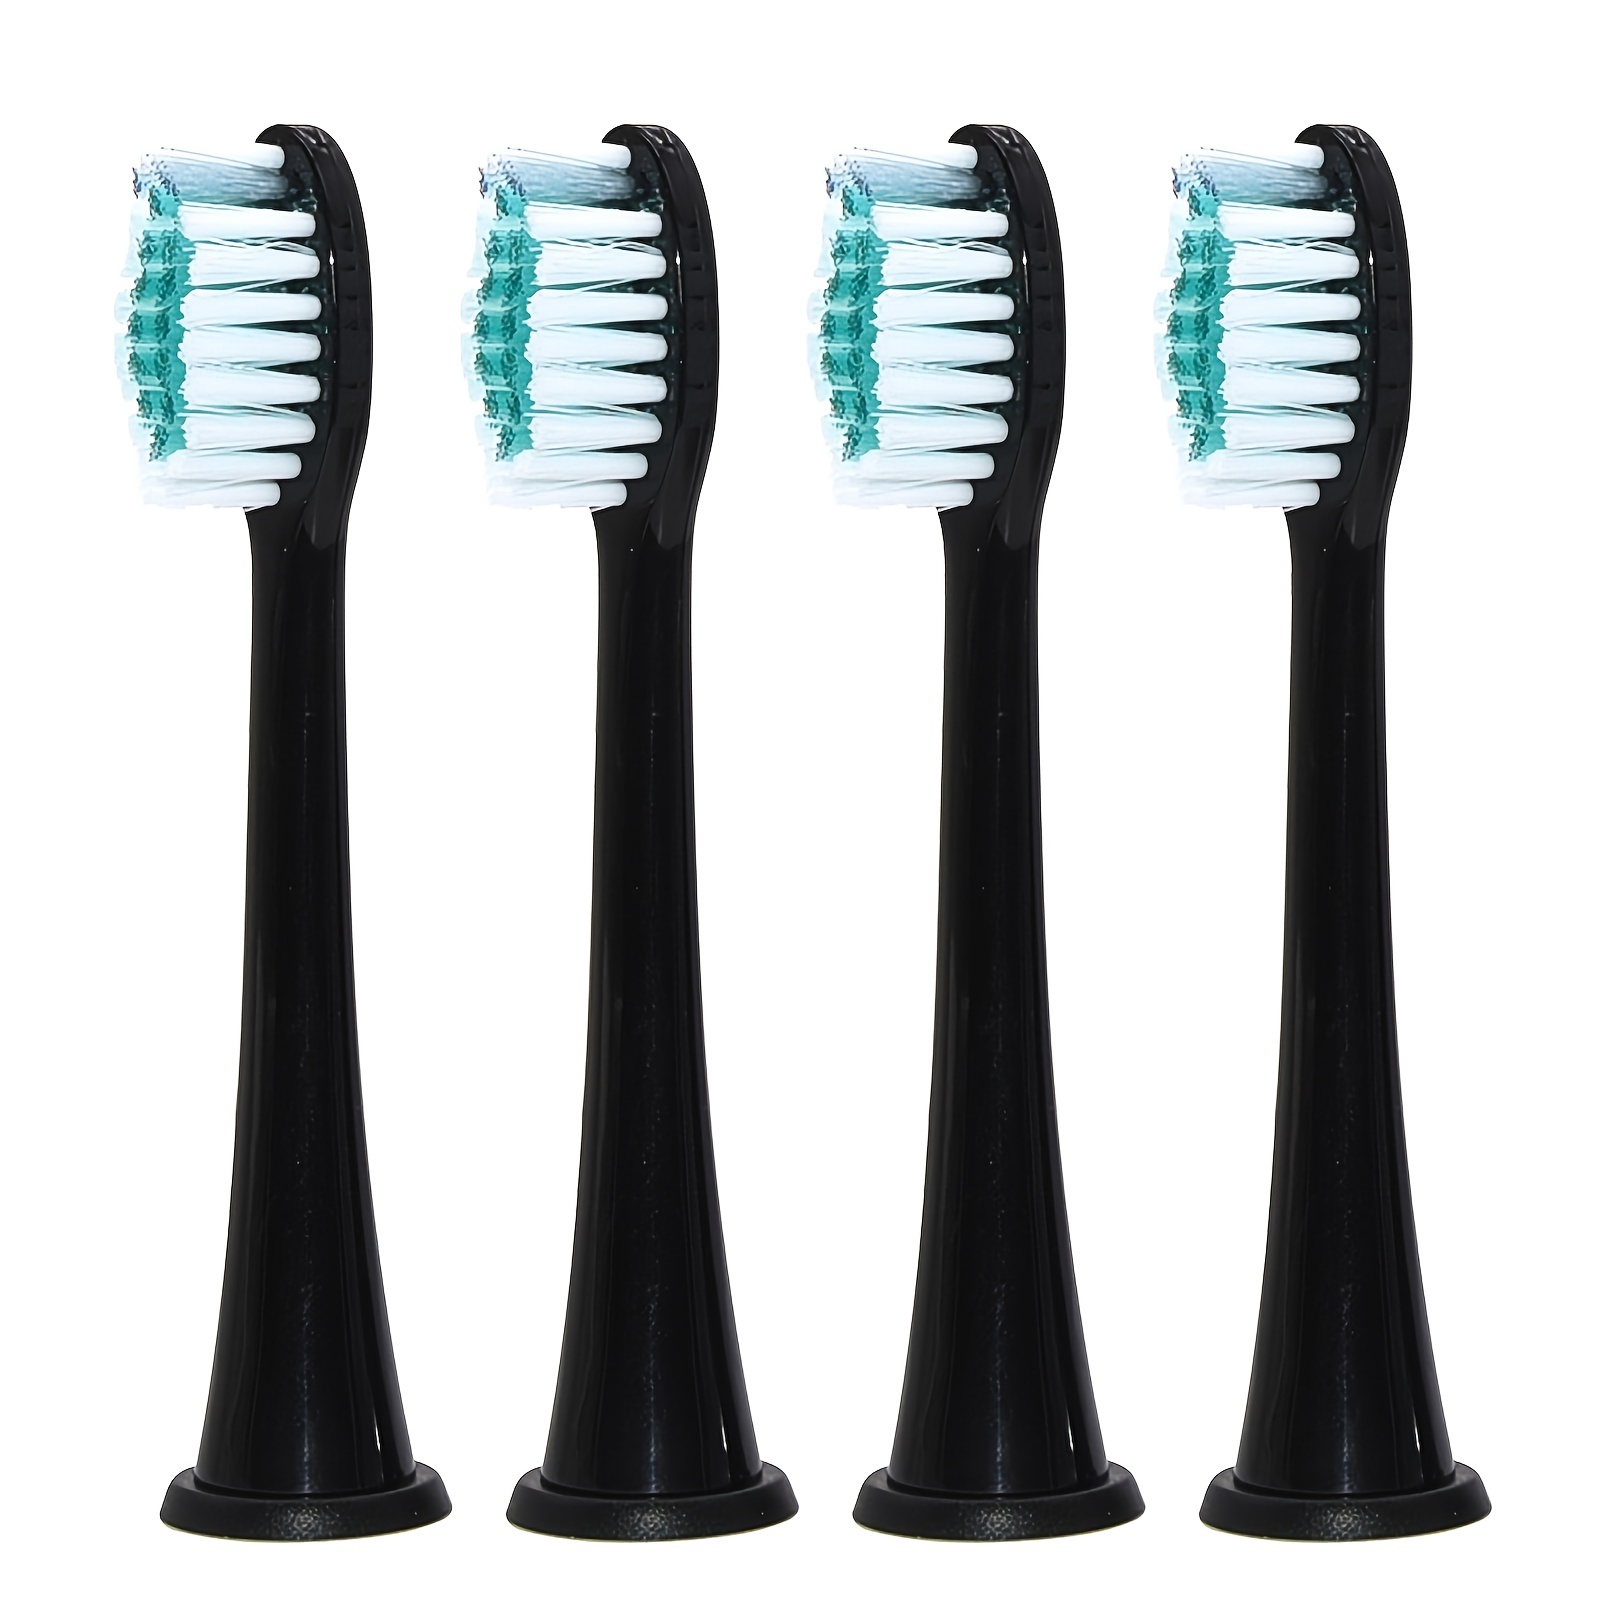 4pcs Philips Electric Toothbrushes Replacement Heads on Sale